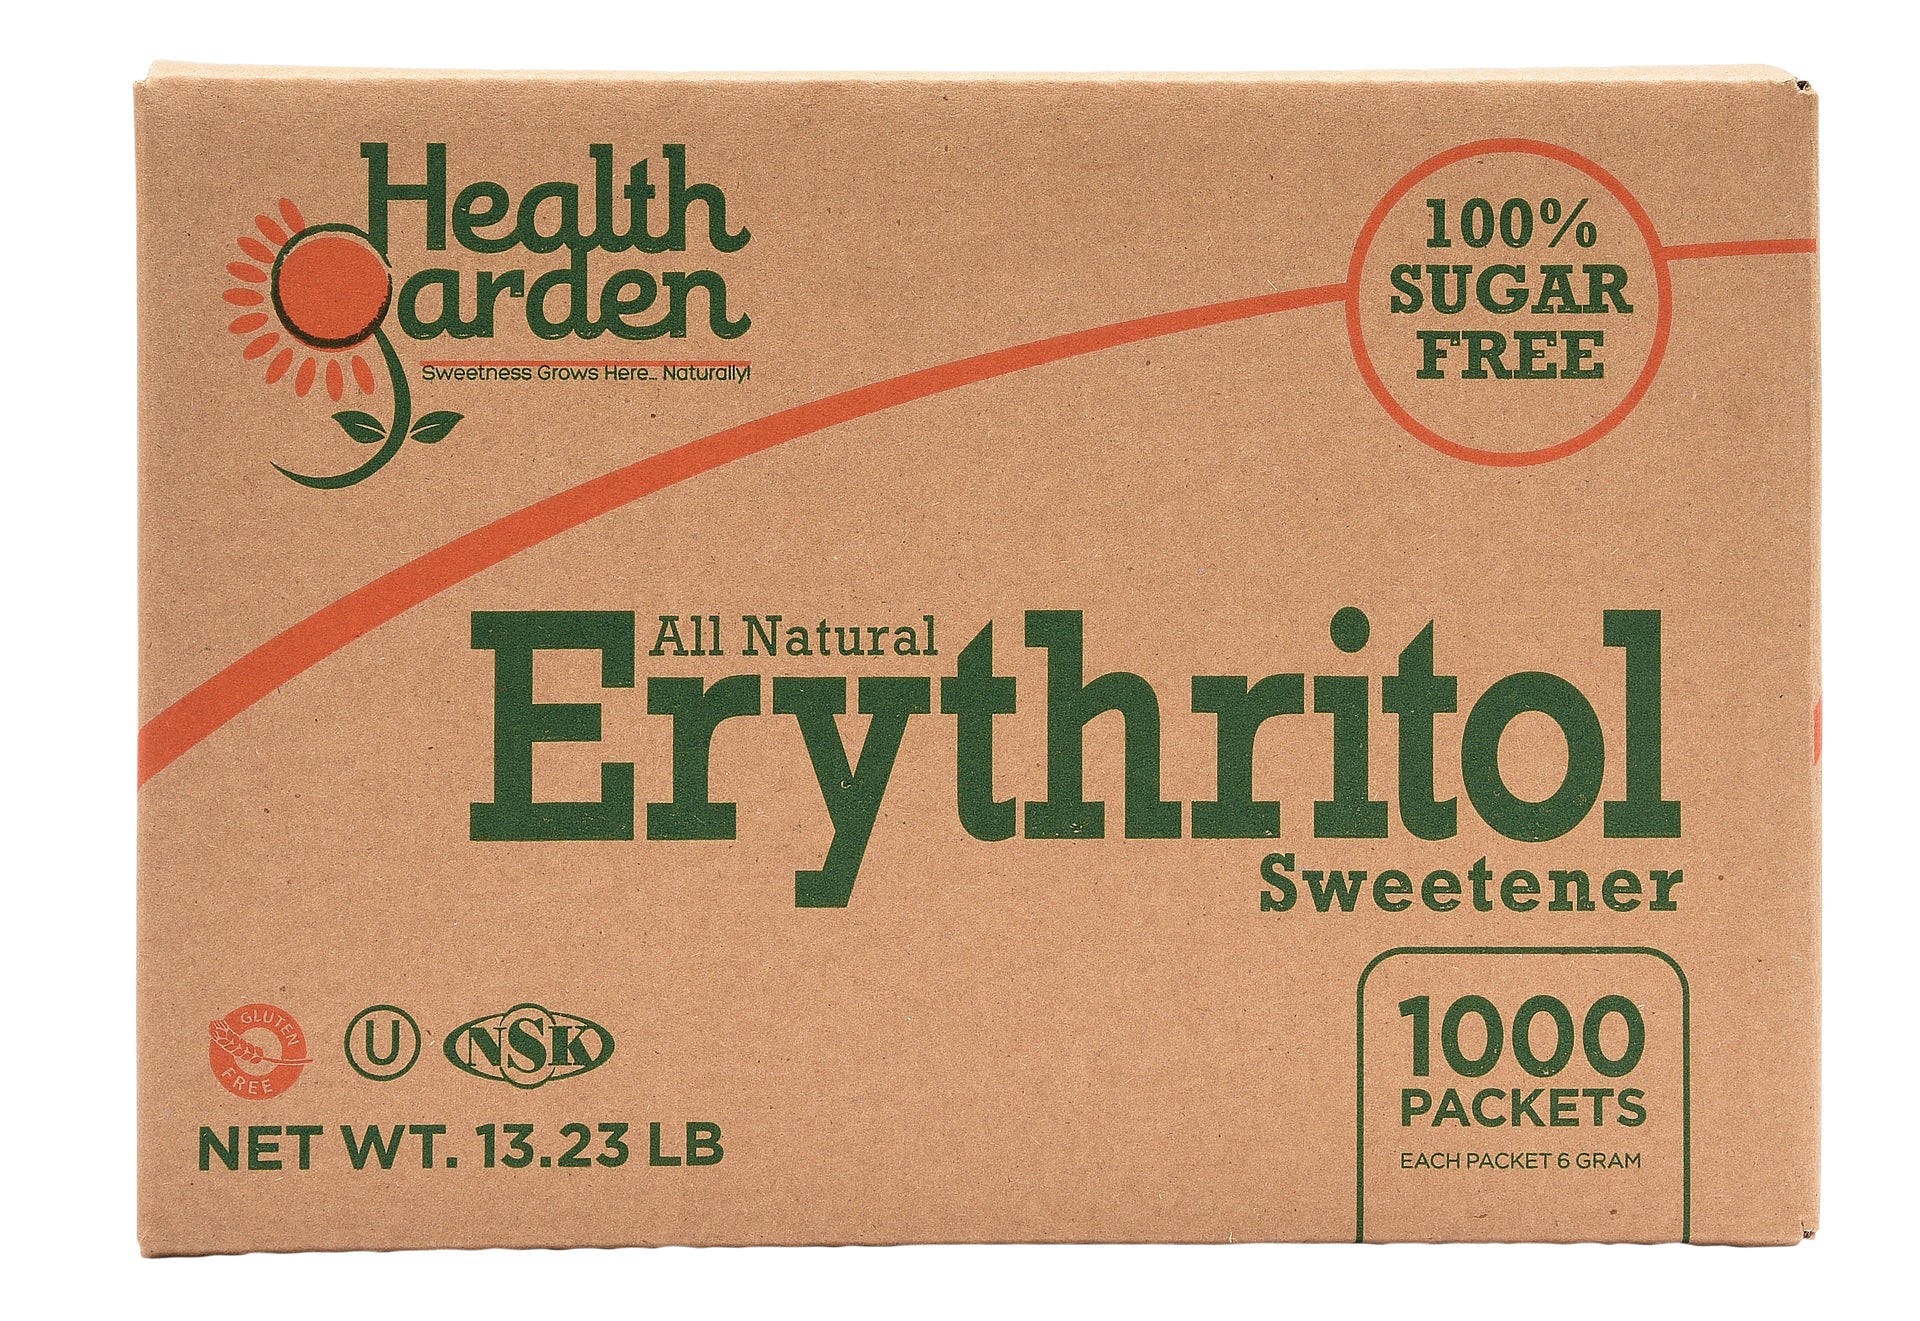 Erythritol: Benefits, Uses, Side Effects, and More